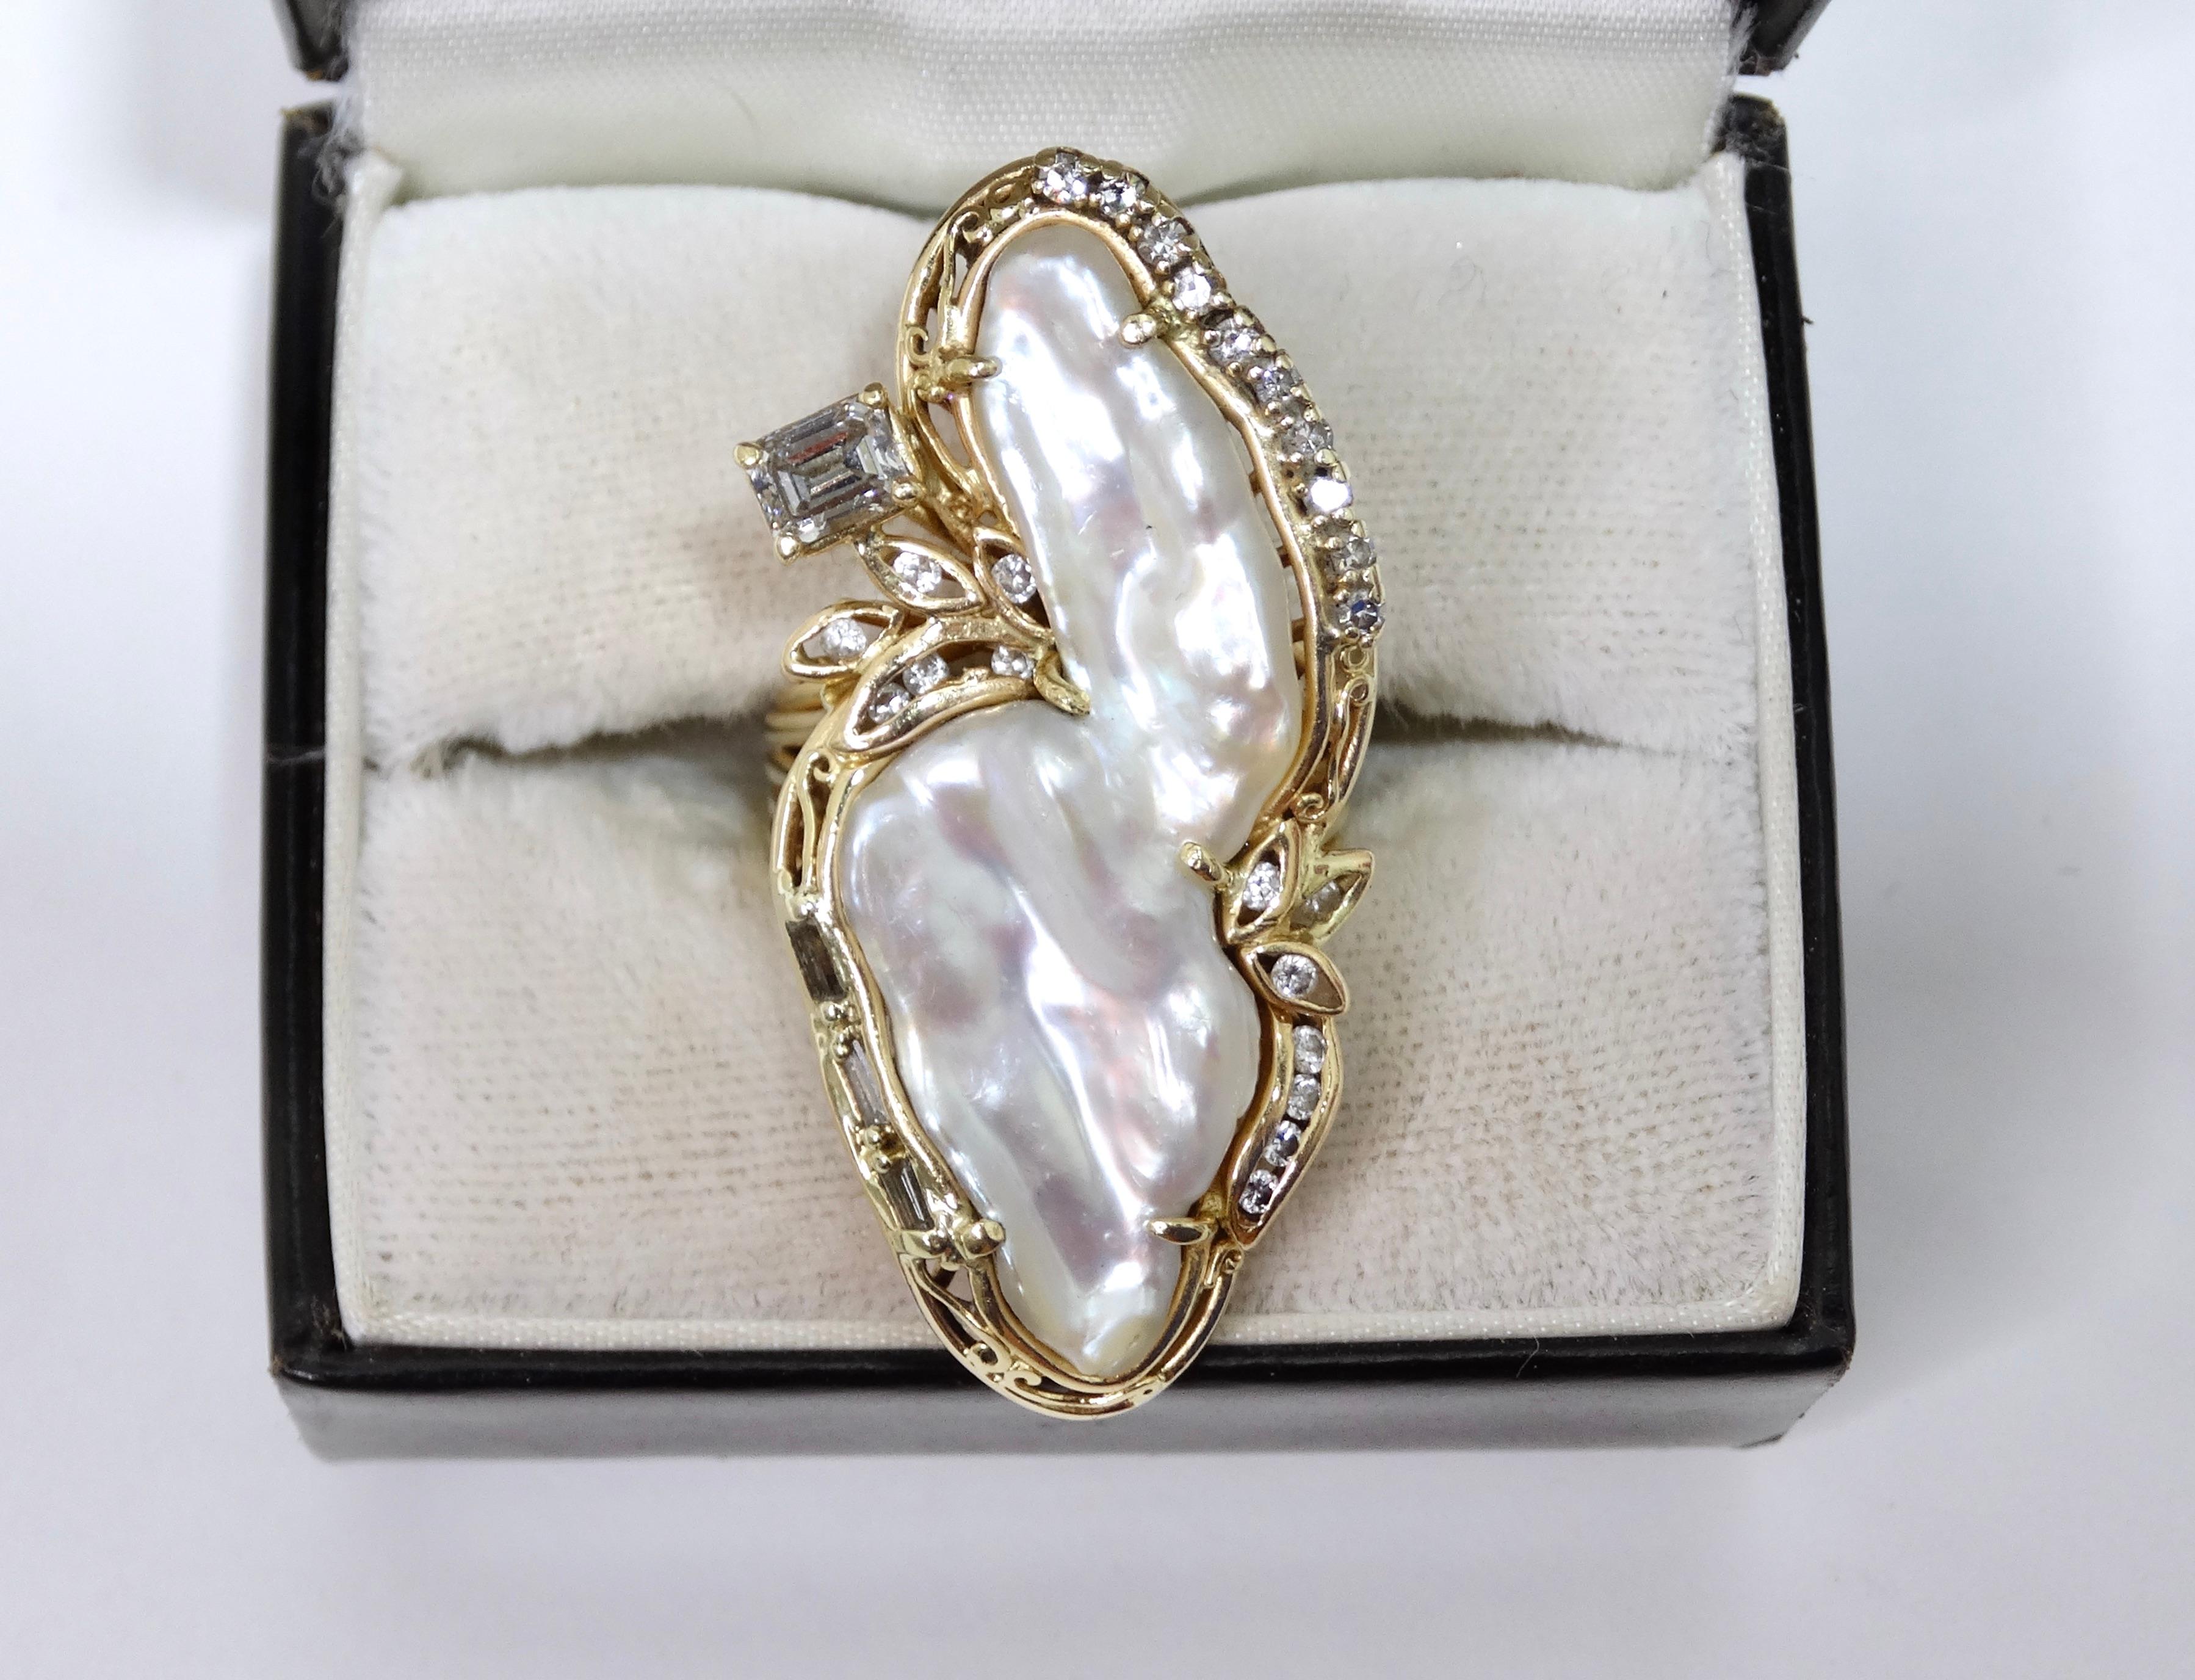 This is a highly designed and unique ring you need in your collection! Don't miss the chance to have a one-of-a-kind freshwater pearl ring. This ring is composed of 18k gold with a large freshwater pearl  as the centerpiece surrounded by small